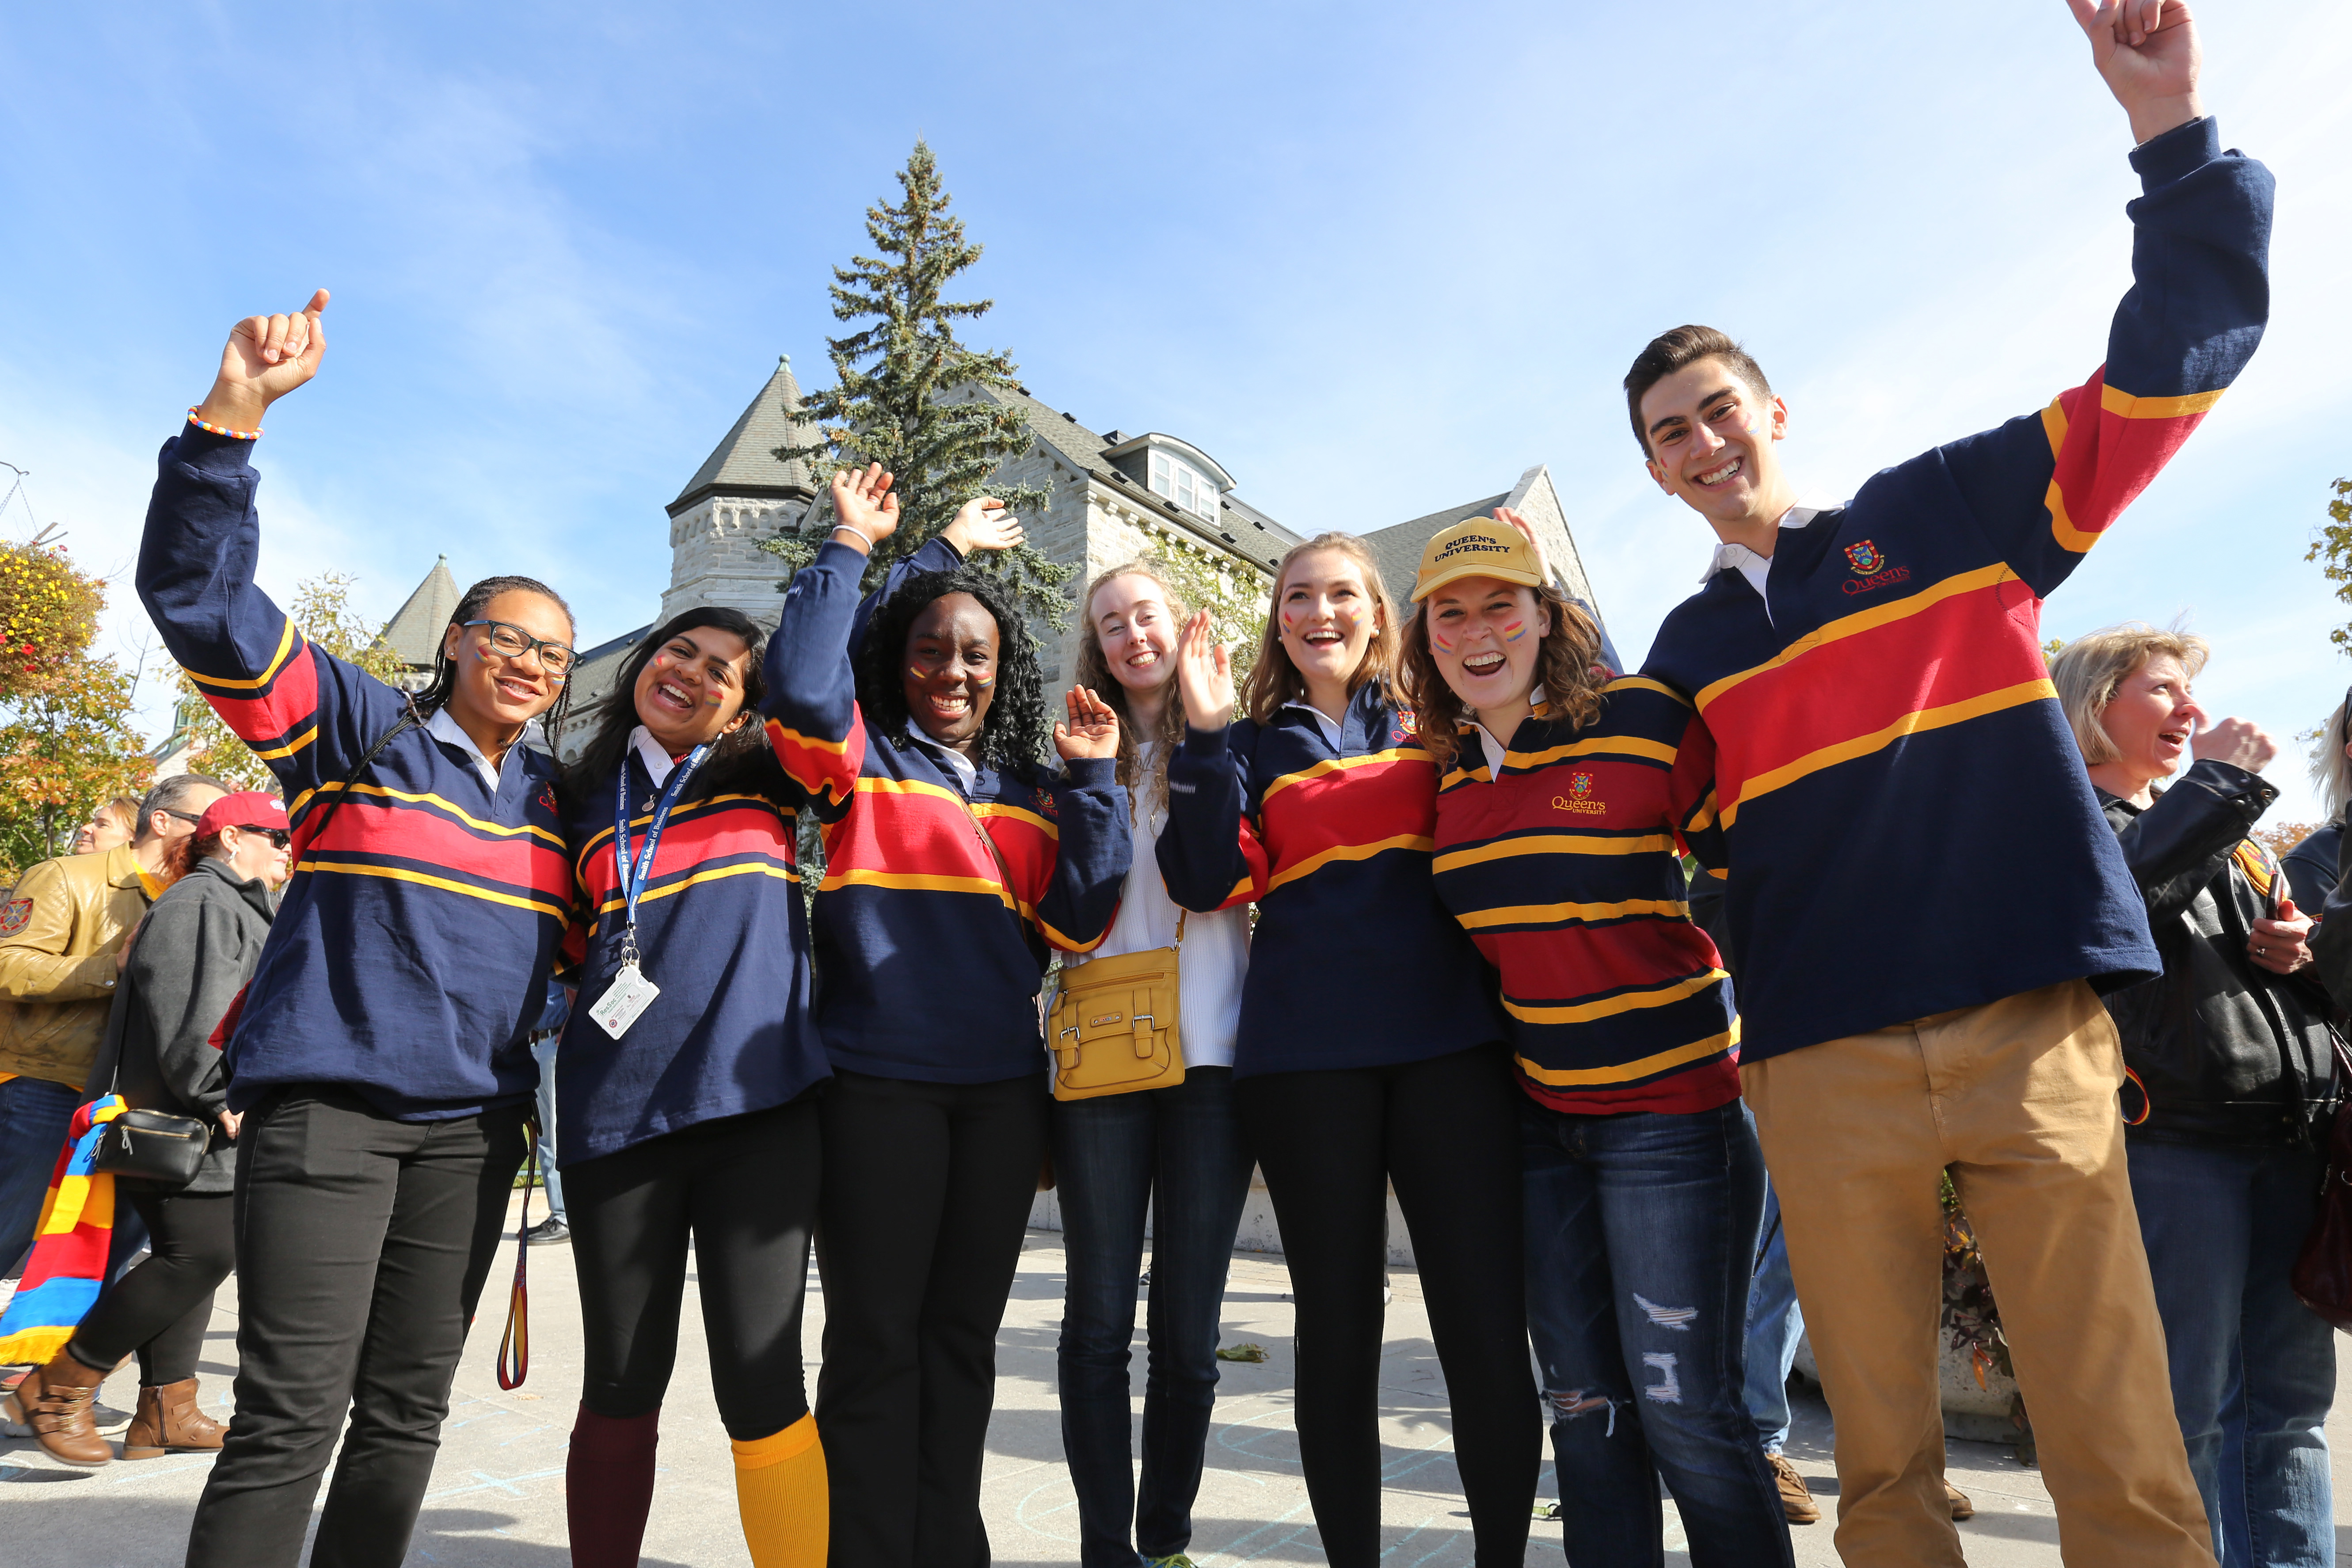 A group of Queen's students standing in a line and cheering.